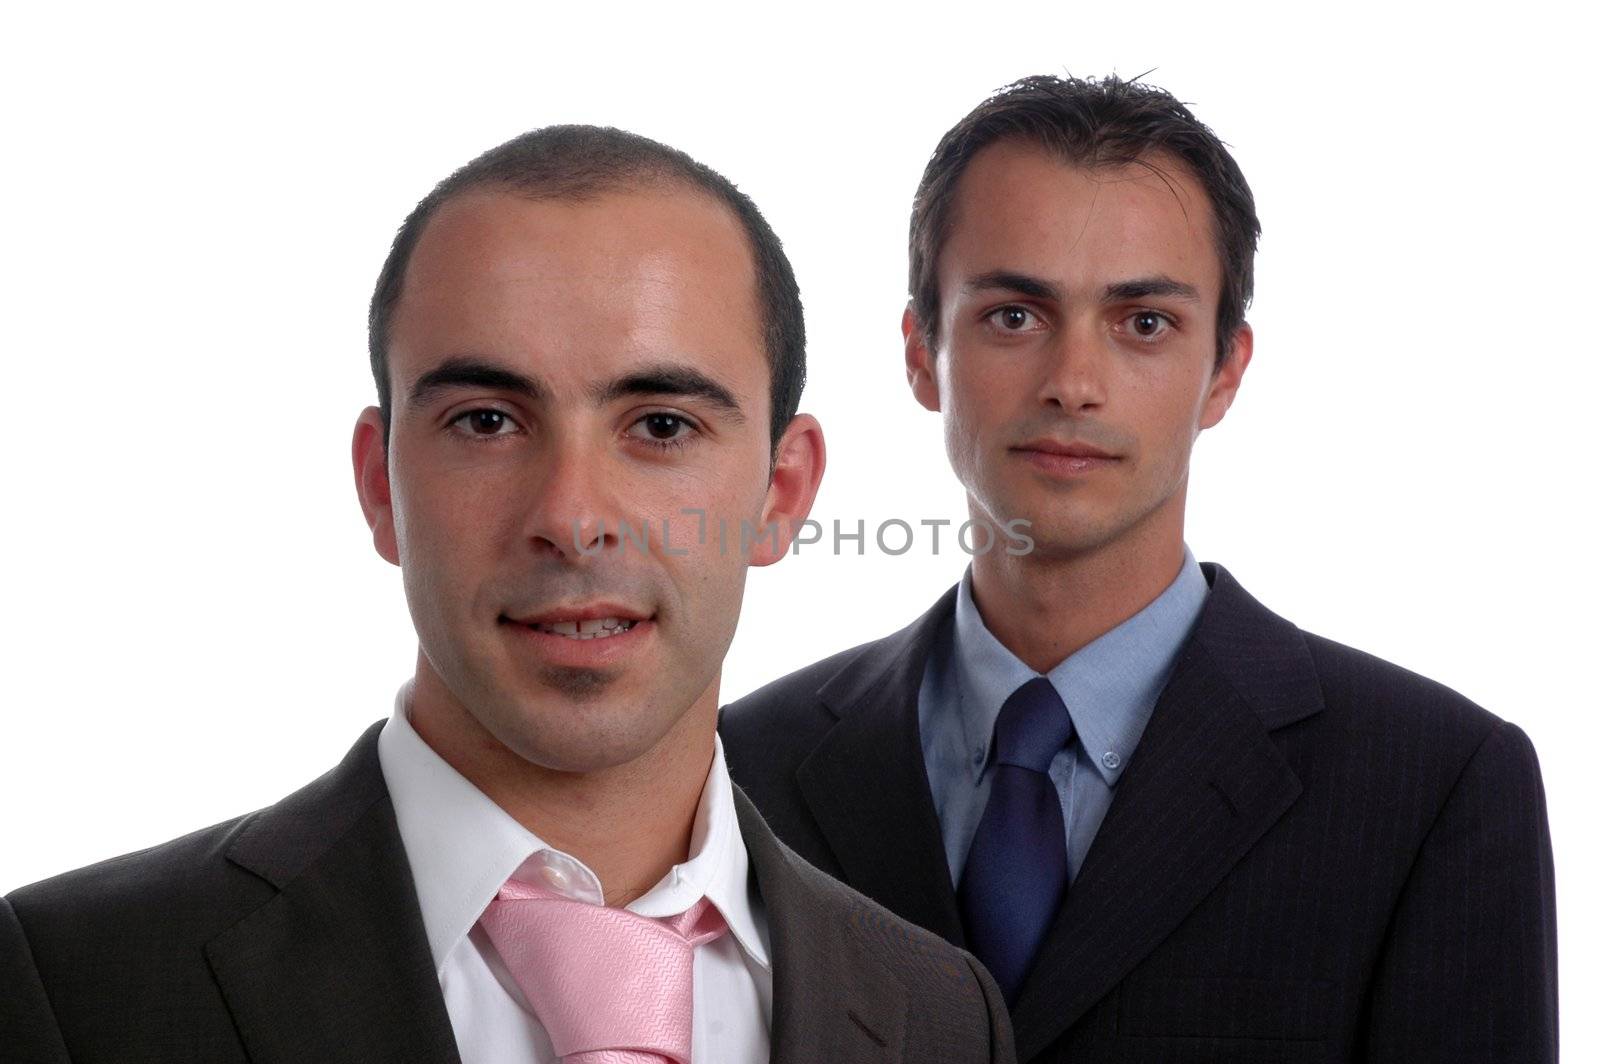 two young business men portrait isolated on white by raalves